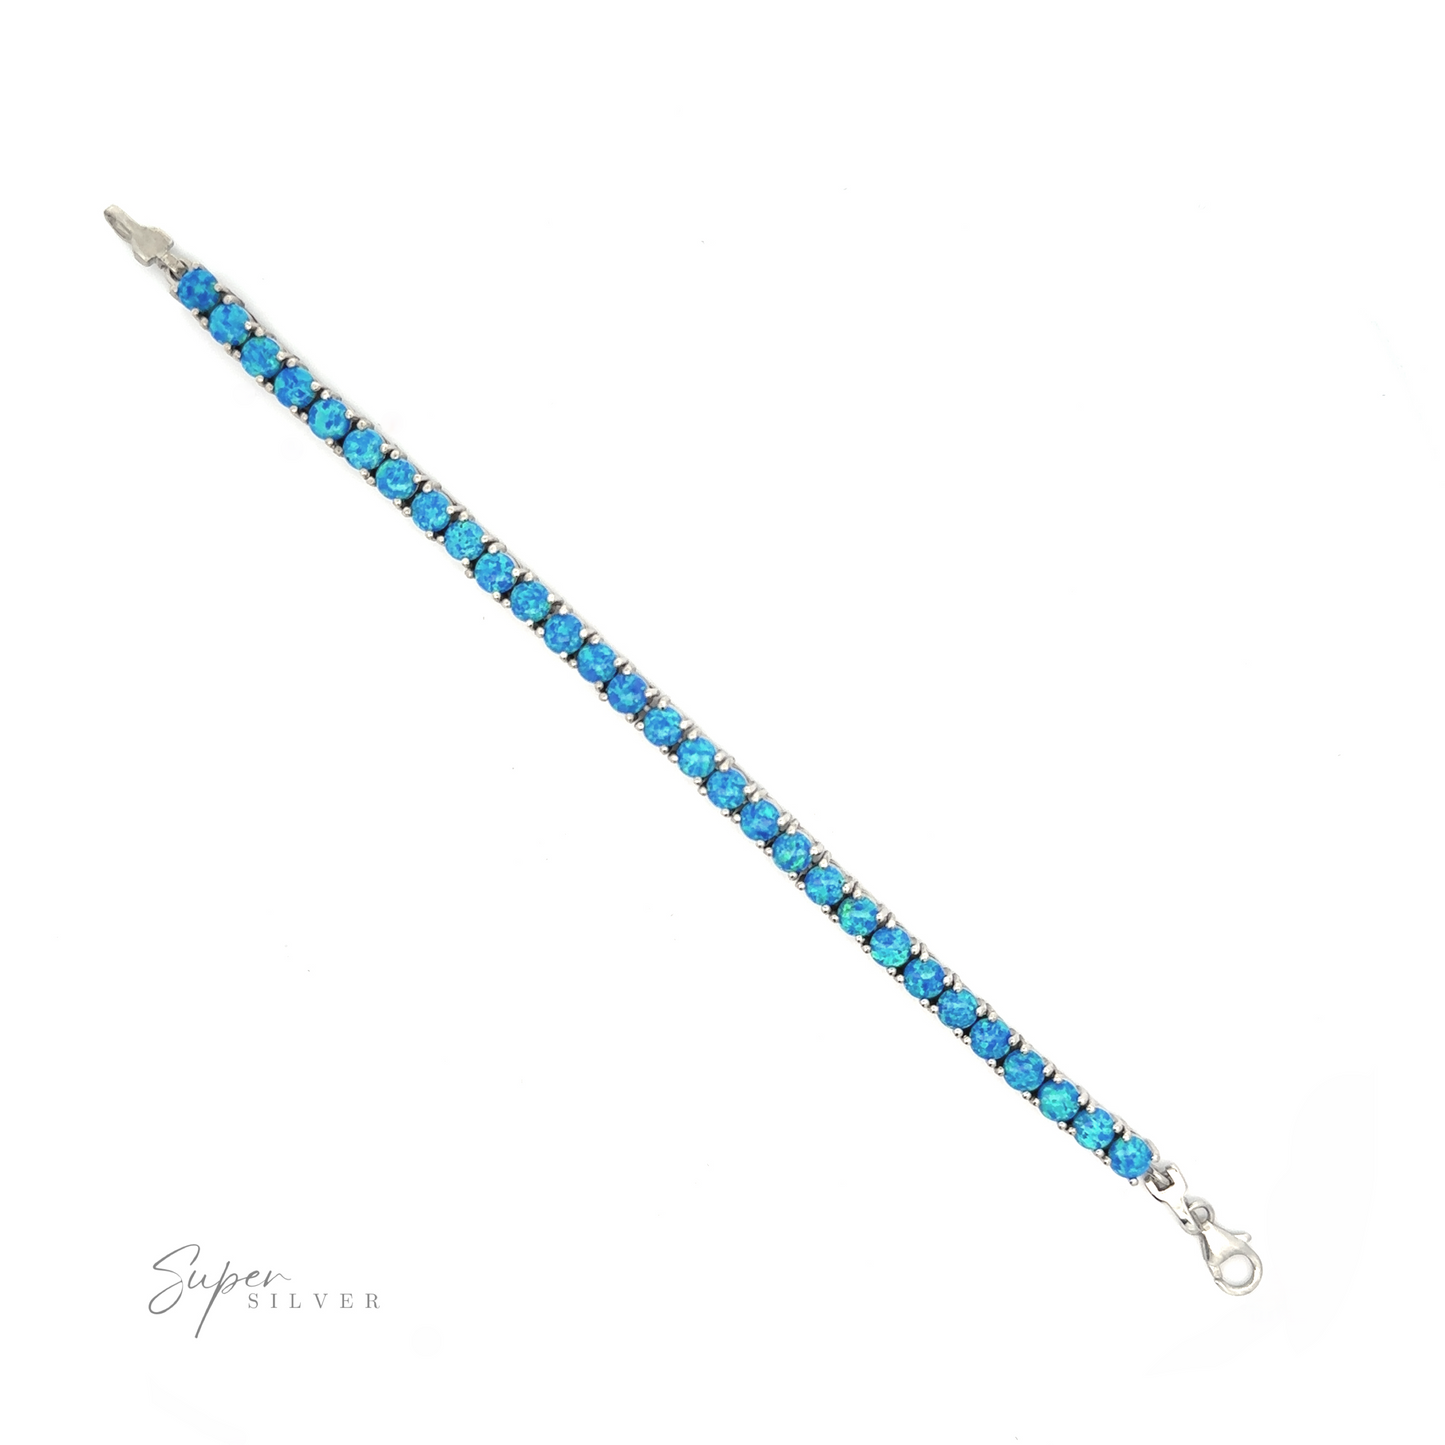 
                  
                    Brilliant Blue Opal Bracelet with blue gemstones arranged in a single line, secured with a lobster clasp, featuring a rhodium finish, on a white background. Signature at bottom right.
                  
                